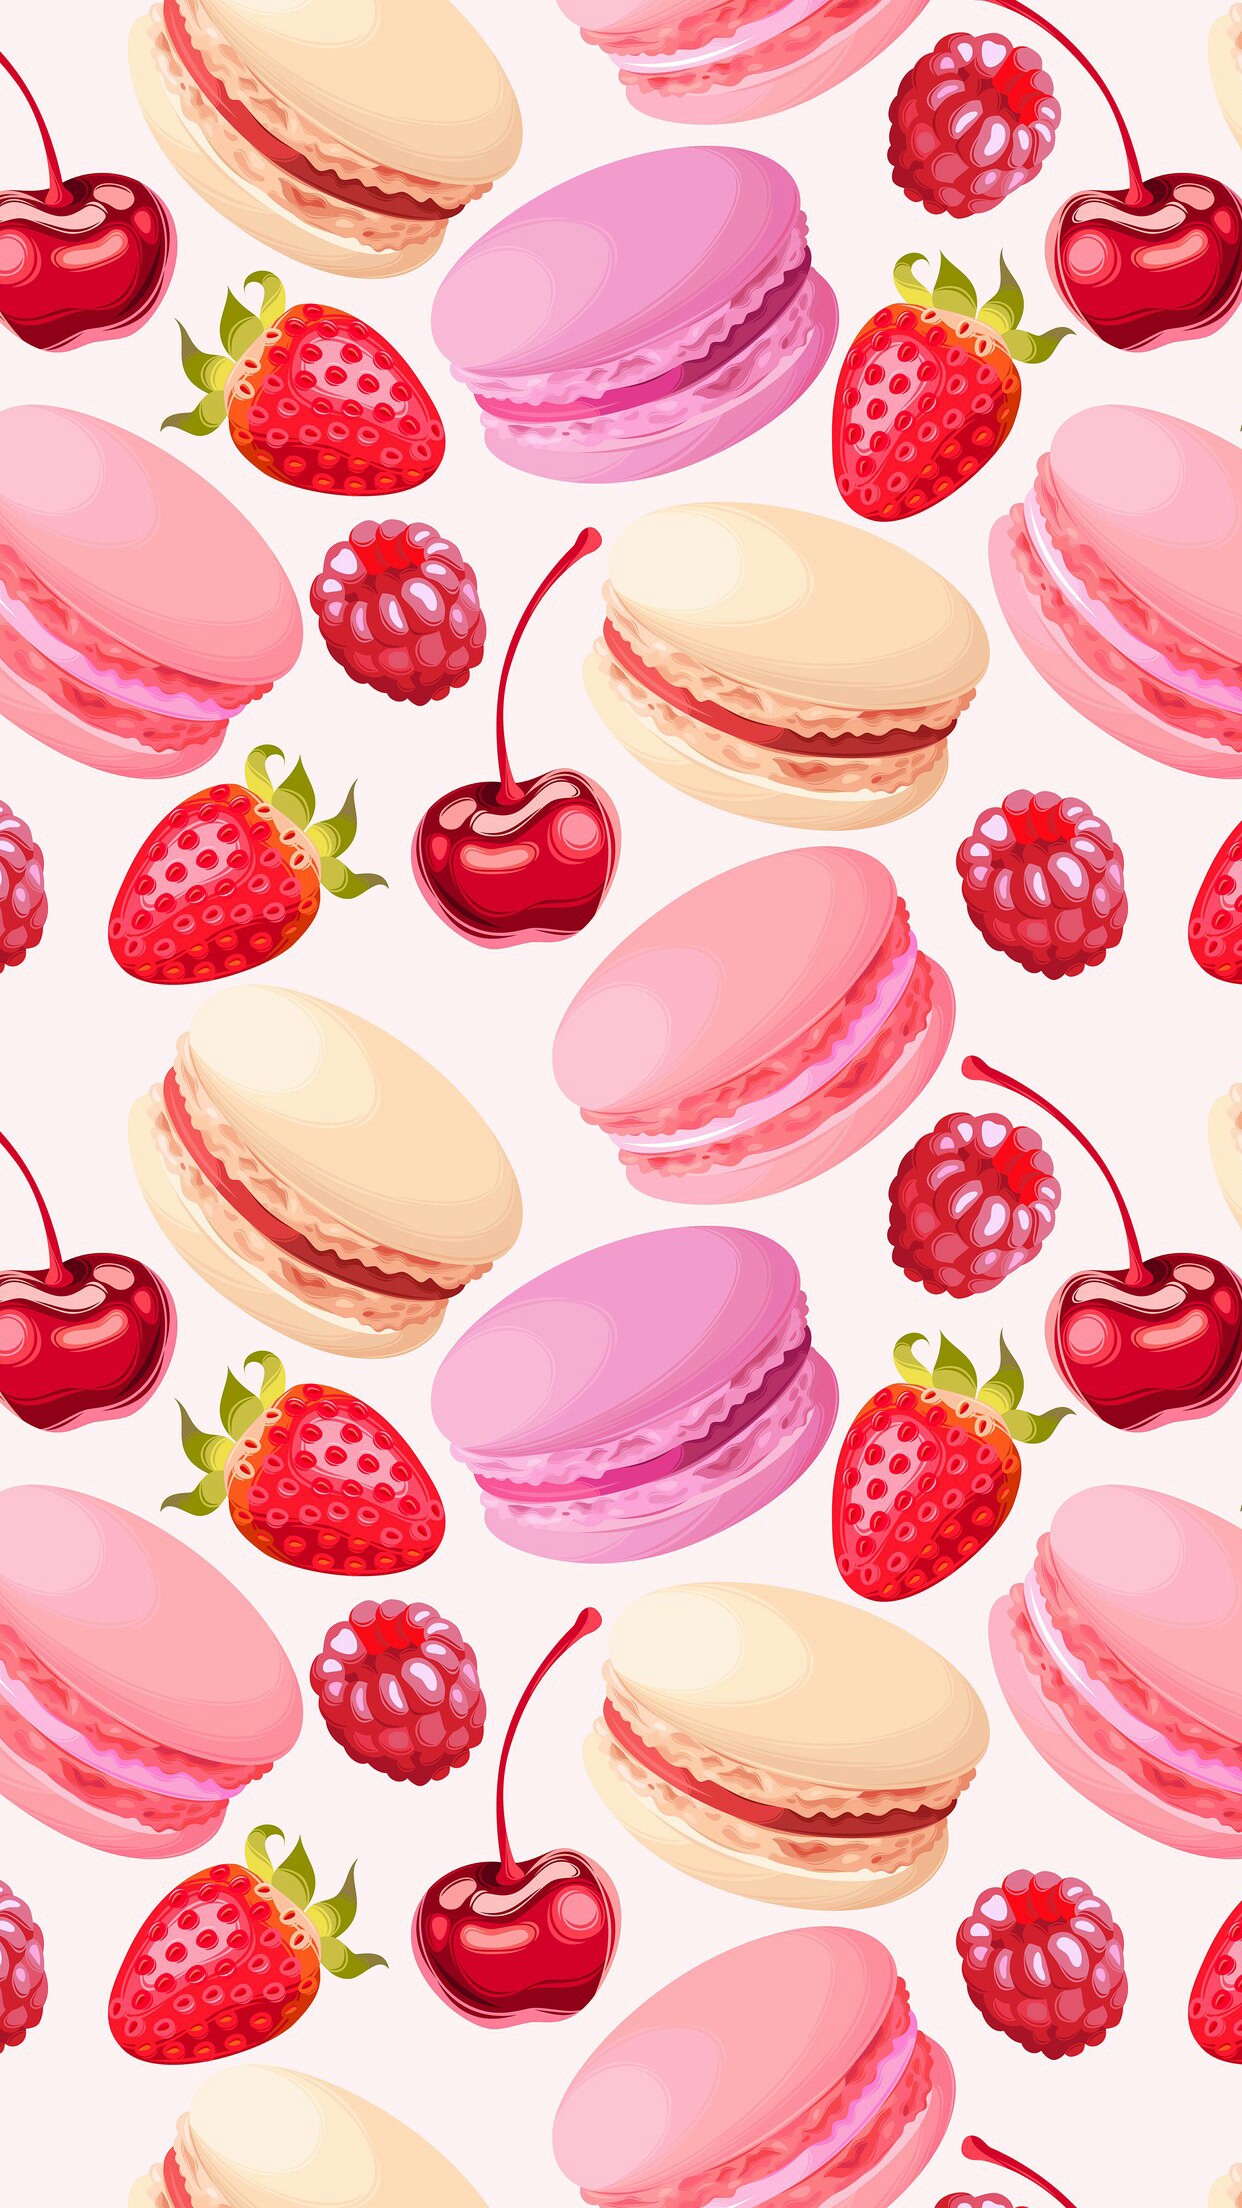 Cute Girly Macaroon Wallpaper for Iphone